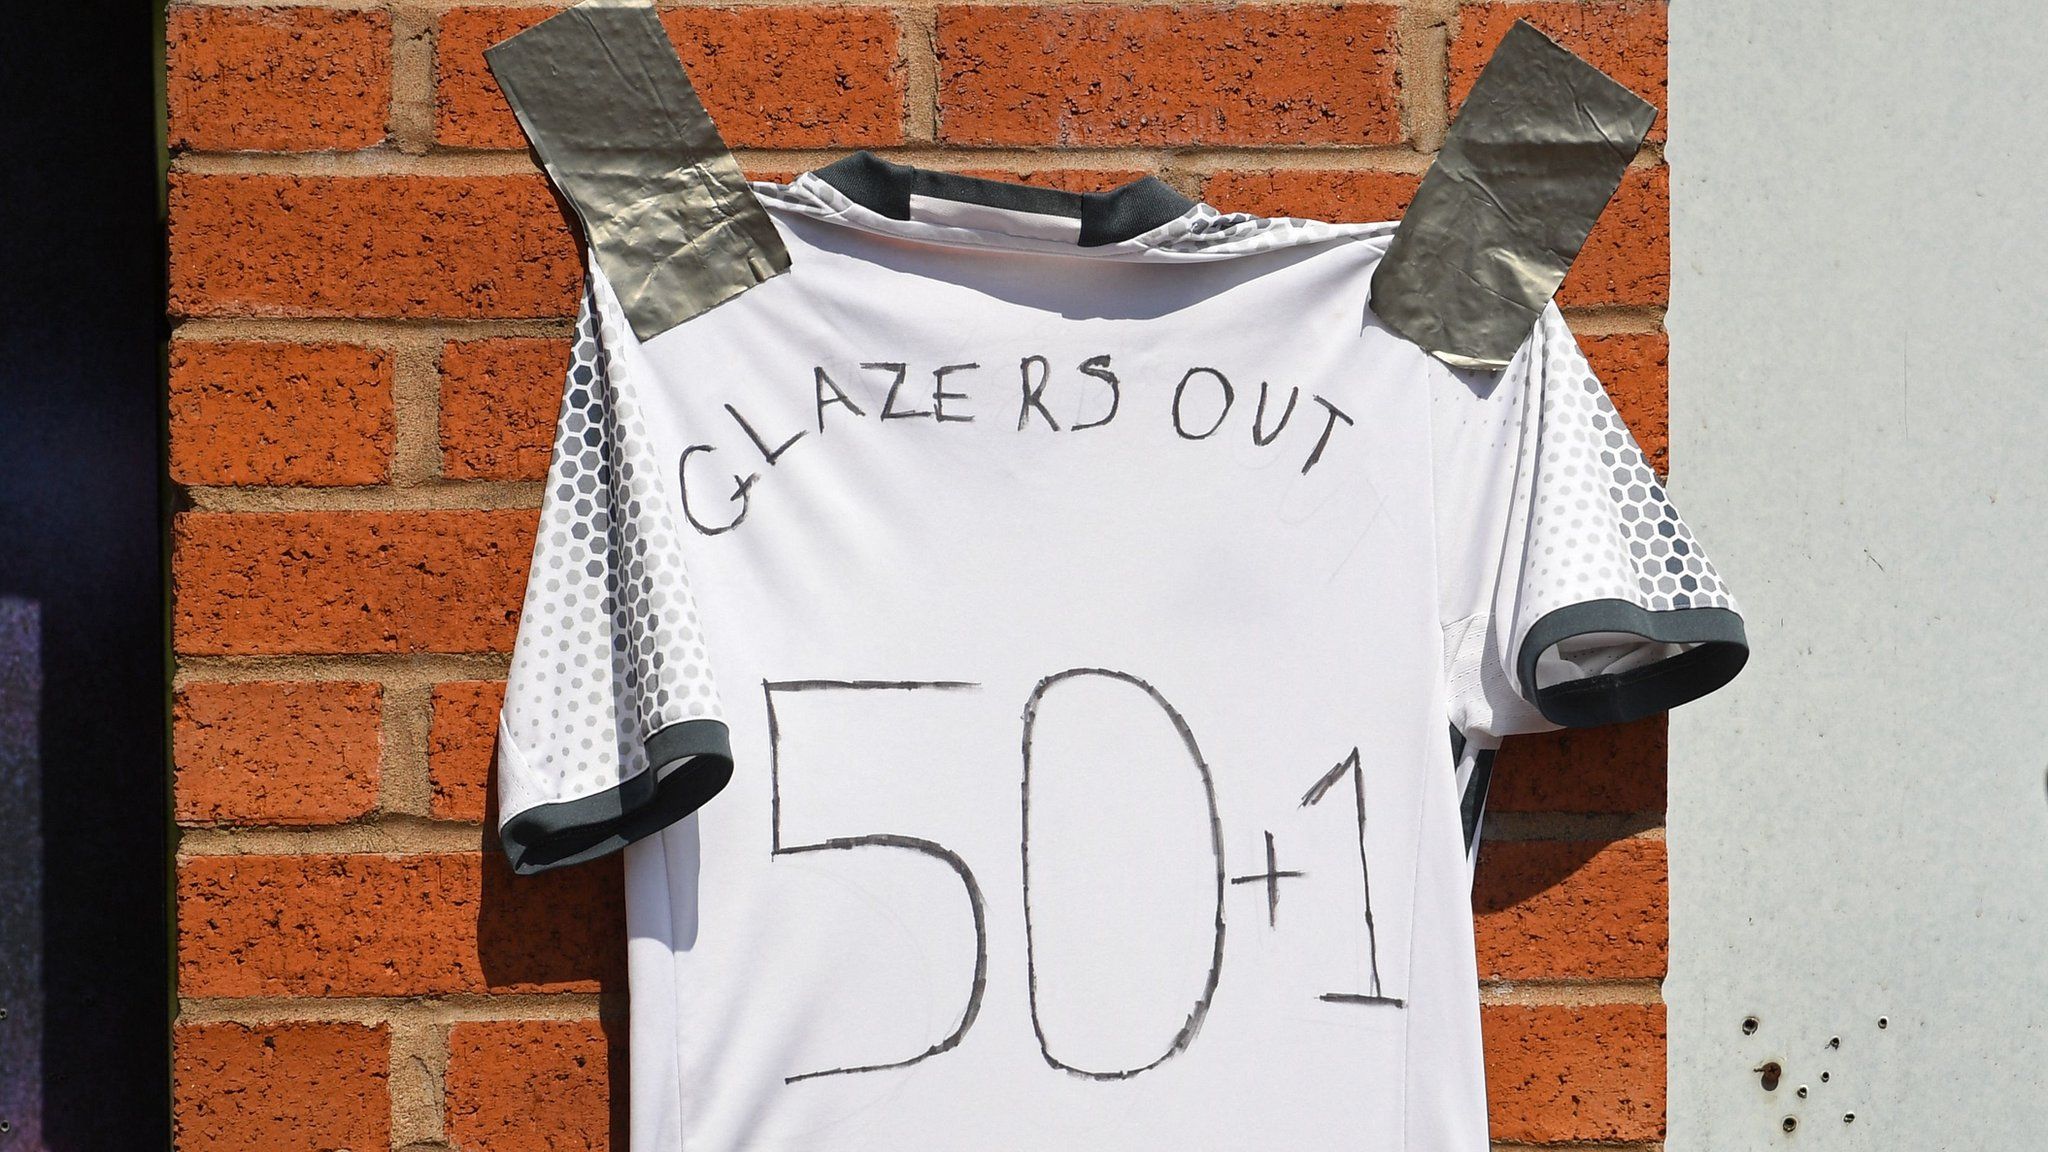 'Glazers Out' written on a shirt outside Old Trafford